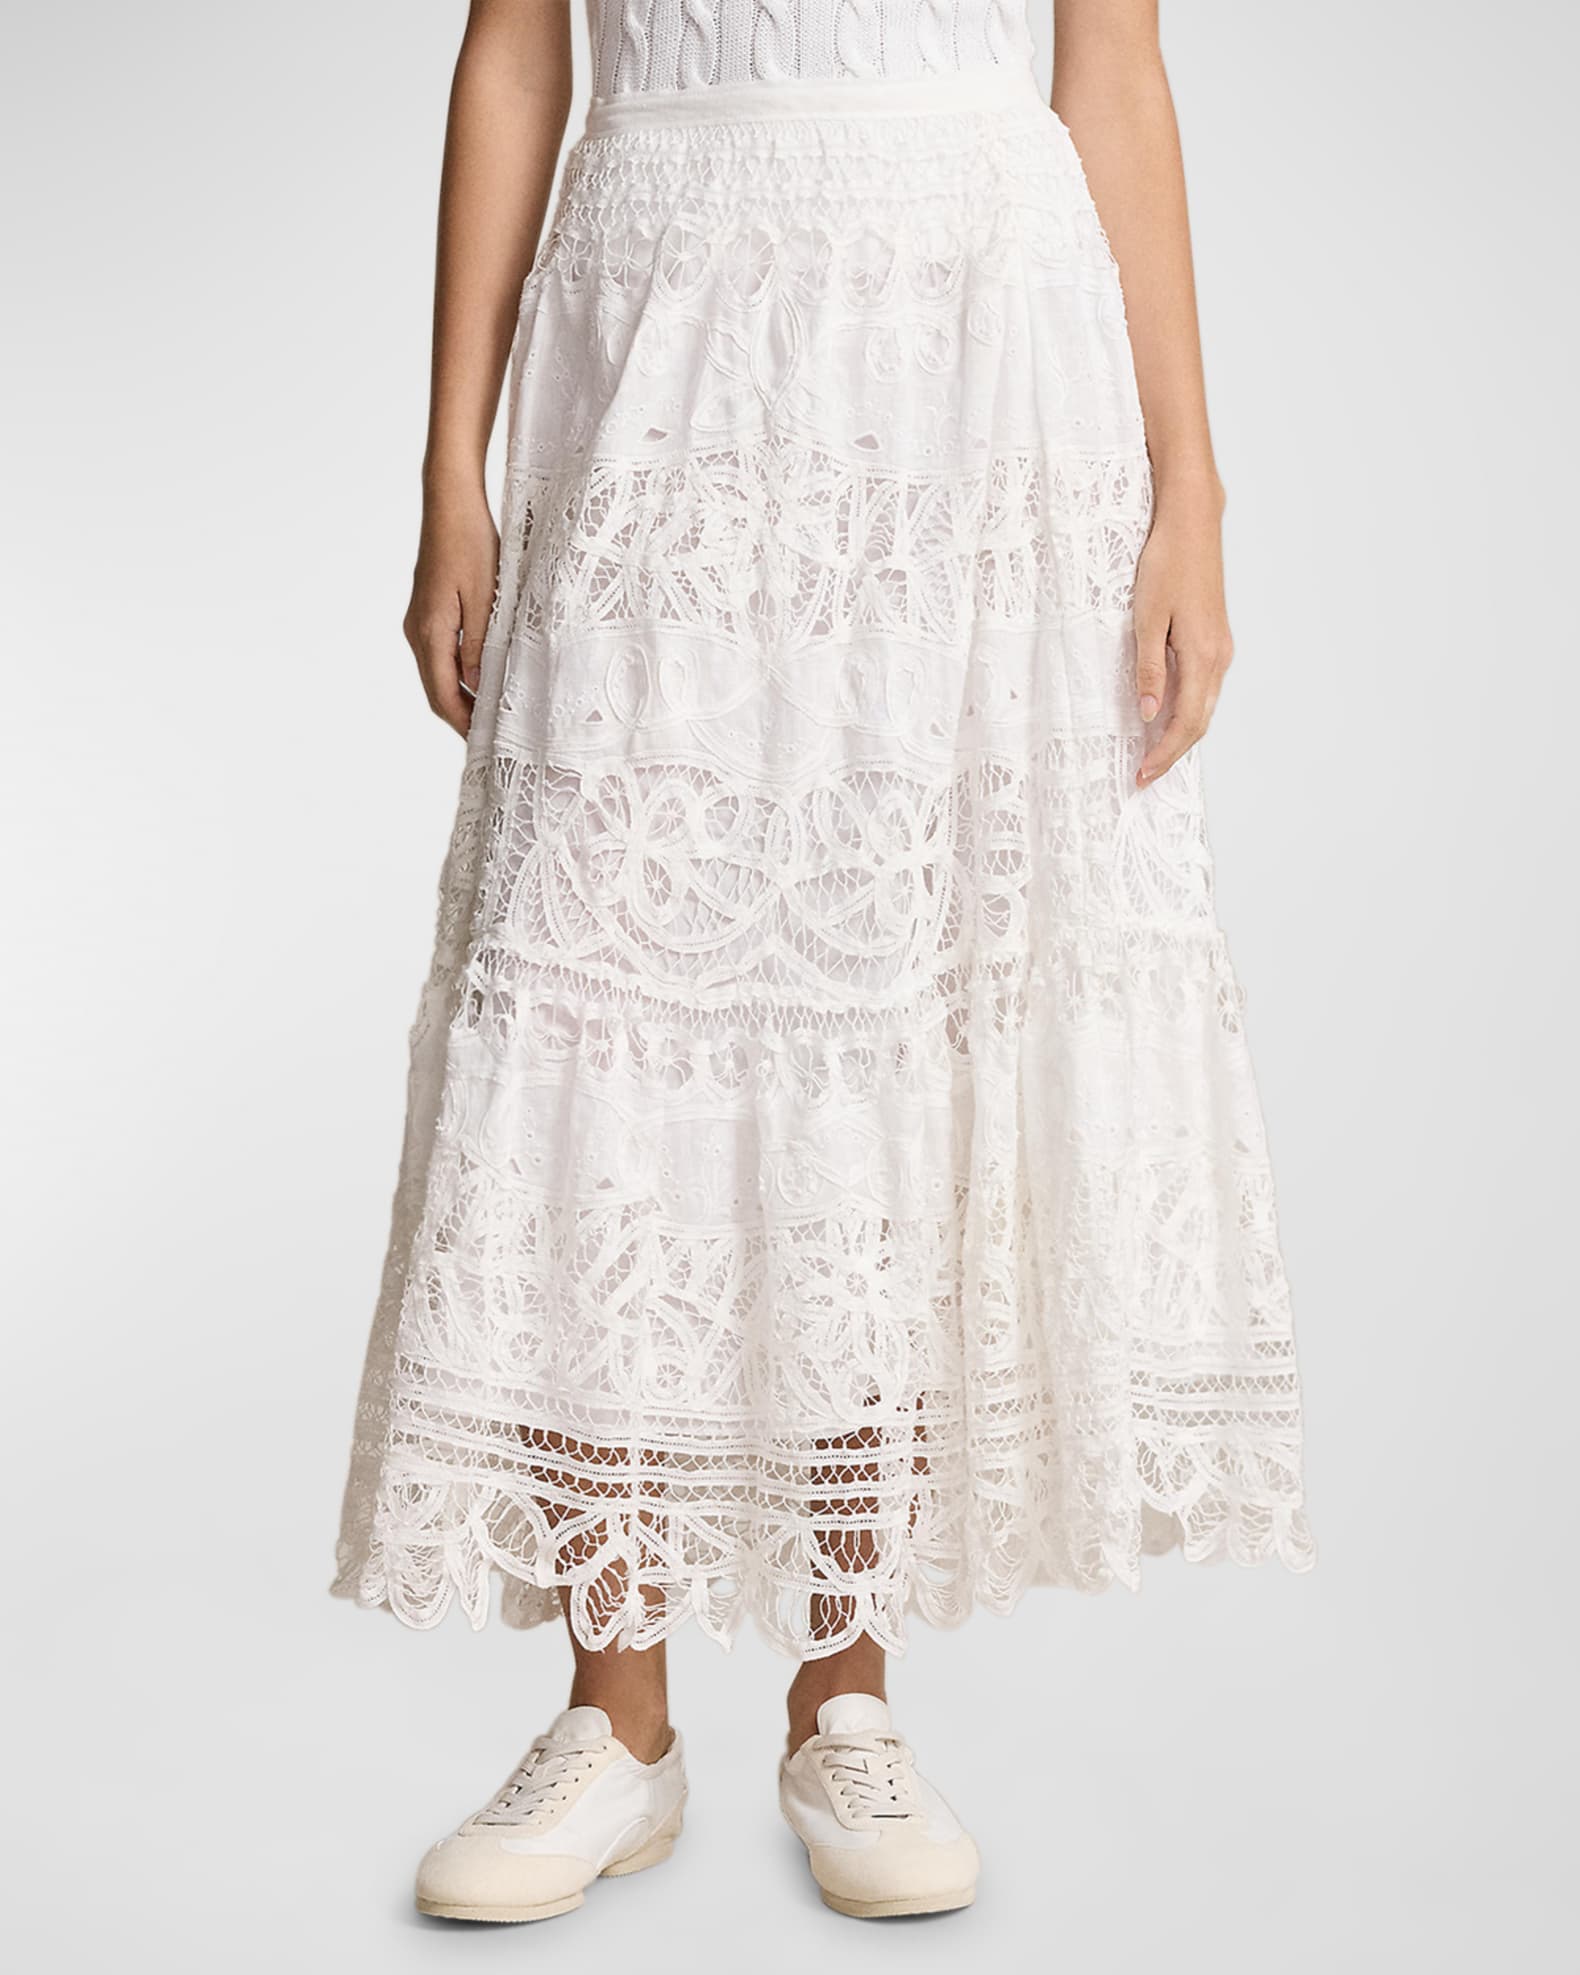 By Walid floral-print linen skirt - White